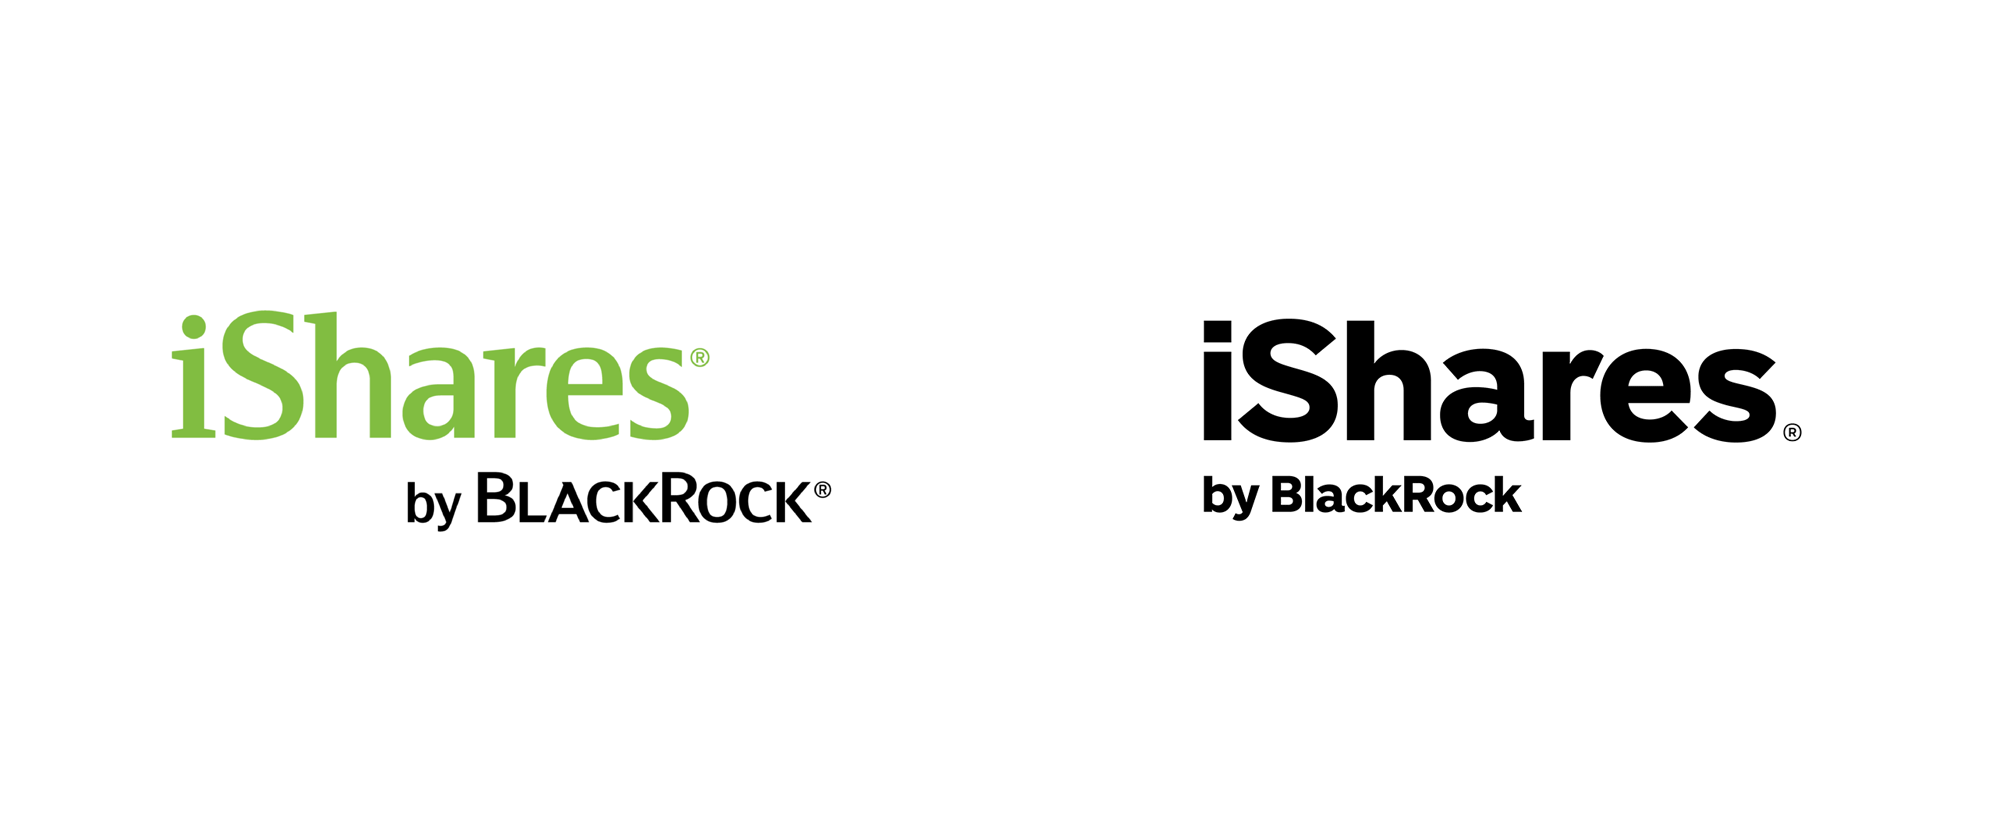 New Logo and Identity for iShares by Turner Duckworth